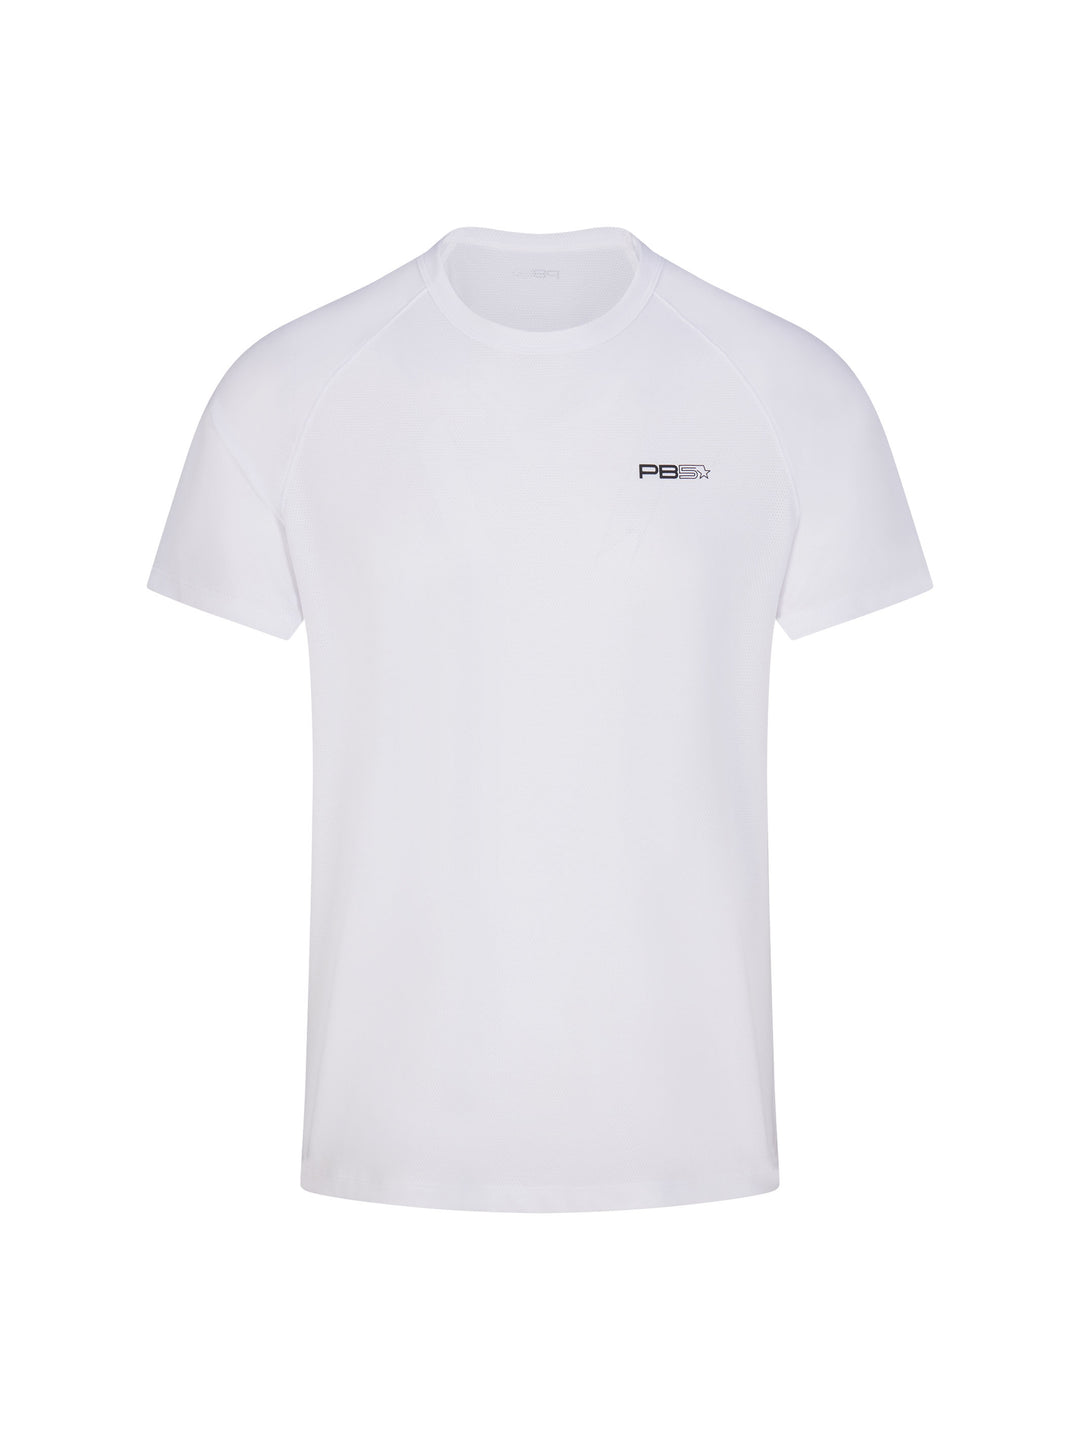 PB5star core performance tee in short sleeve, white color. Small logo printed on front, upper left side of shirt.